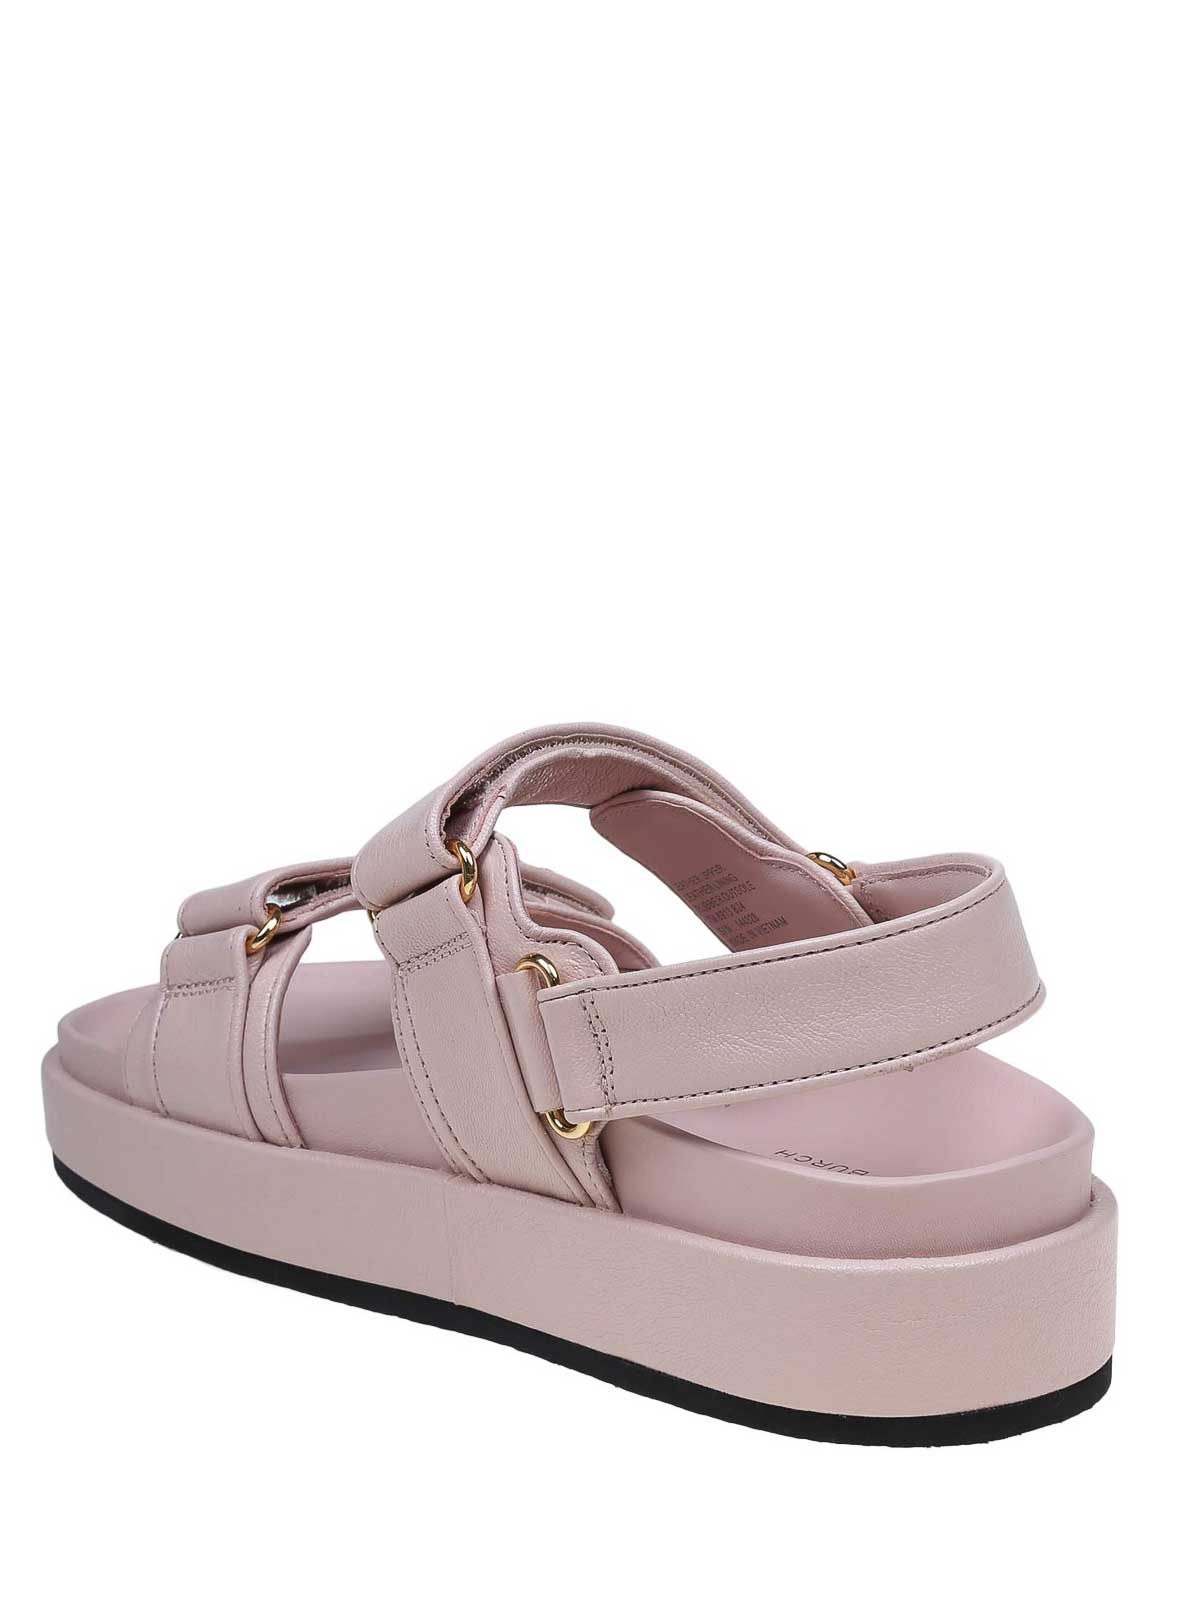 Shop Tory Burch Leather Kira Sandals In Pink